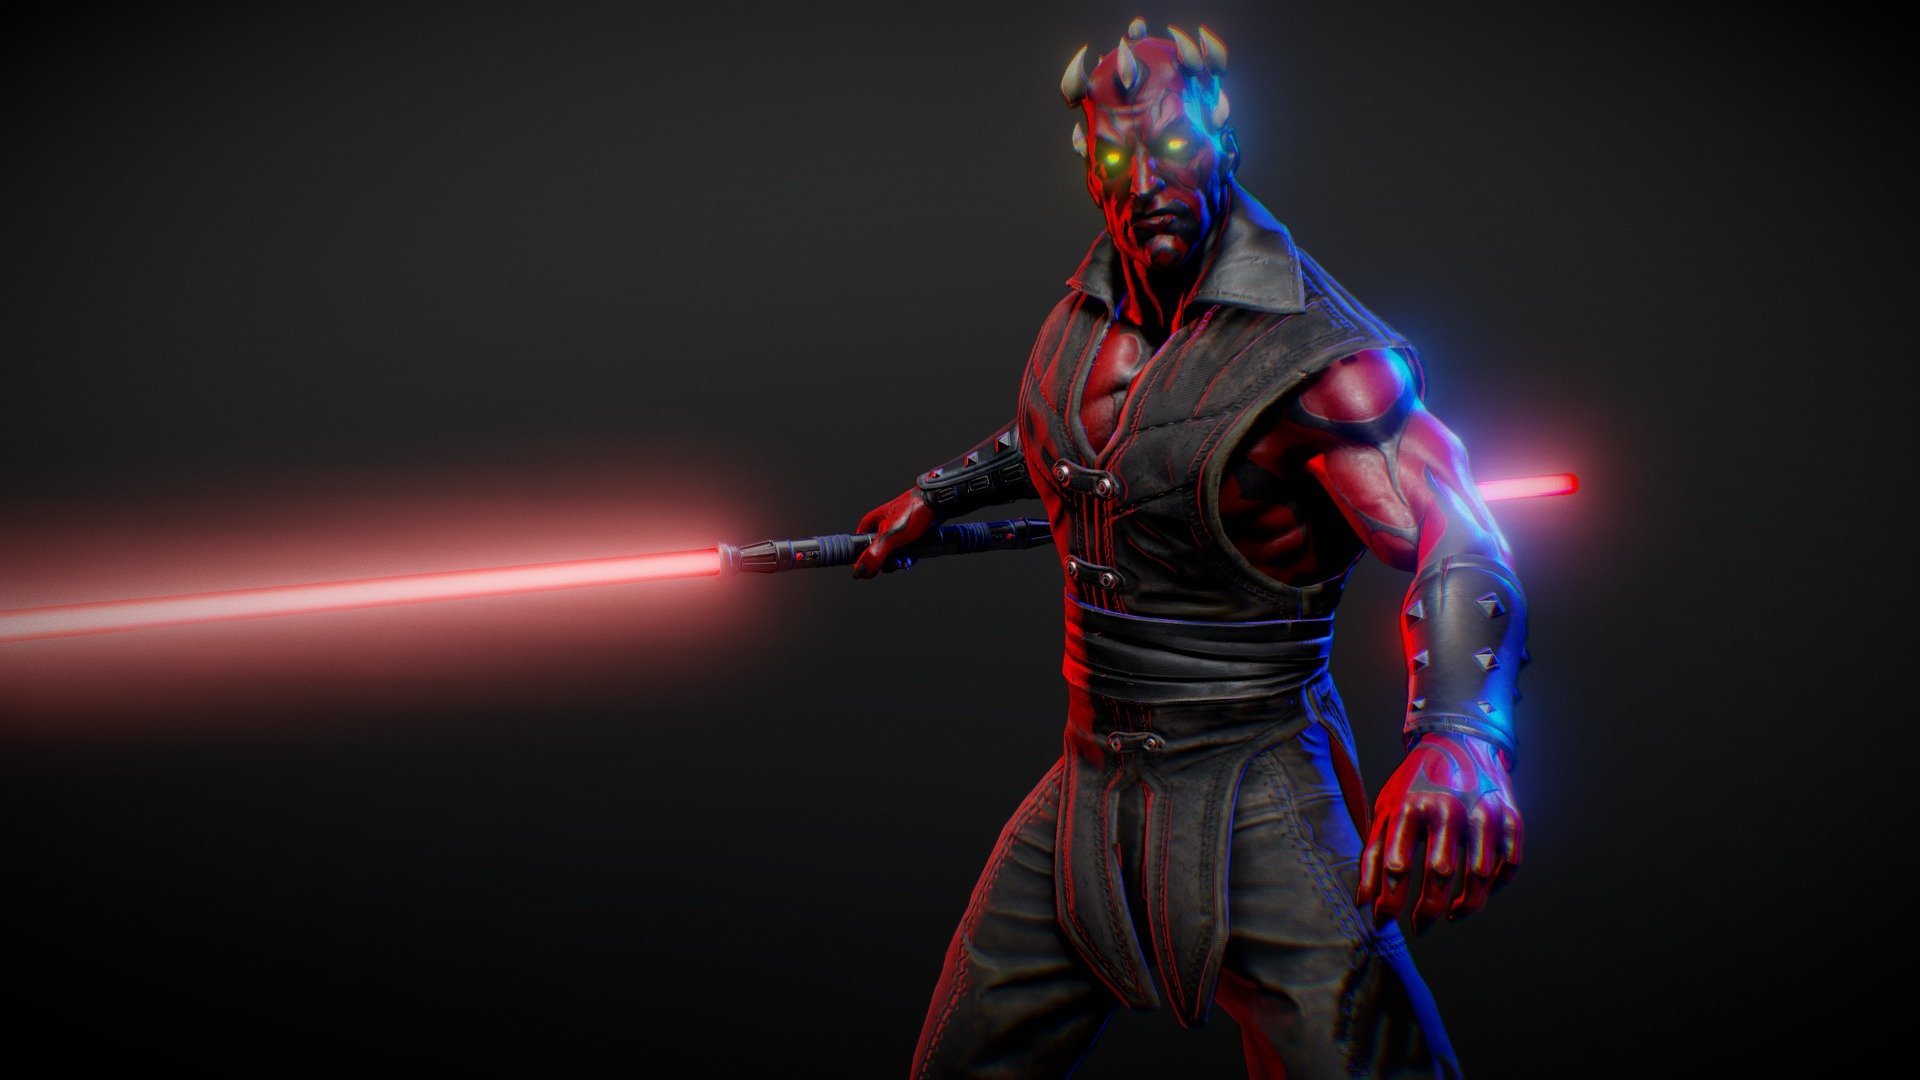 Hi guys. I made a low-rez model of Darth Maul, and also practiced creating textures and rig for the character. At first I wanted to make only one combat pose, but then I decided to make a simple idle to revive the model.
More artworks here:
https://www.artstation.com/marvel_toliks - Darth Maul - 3D model by marvel_tol 3d model